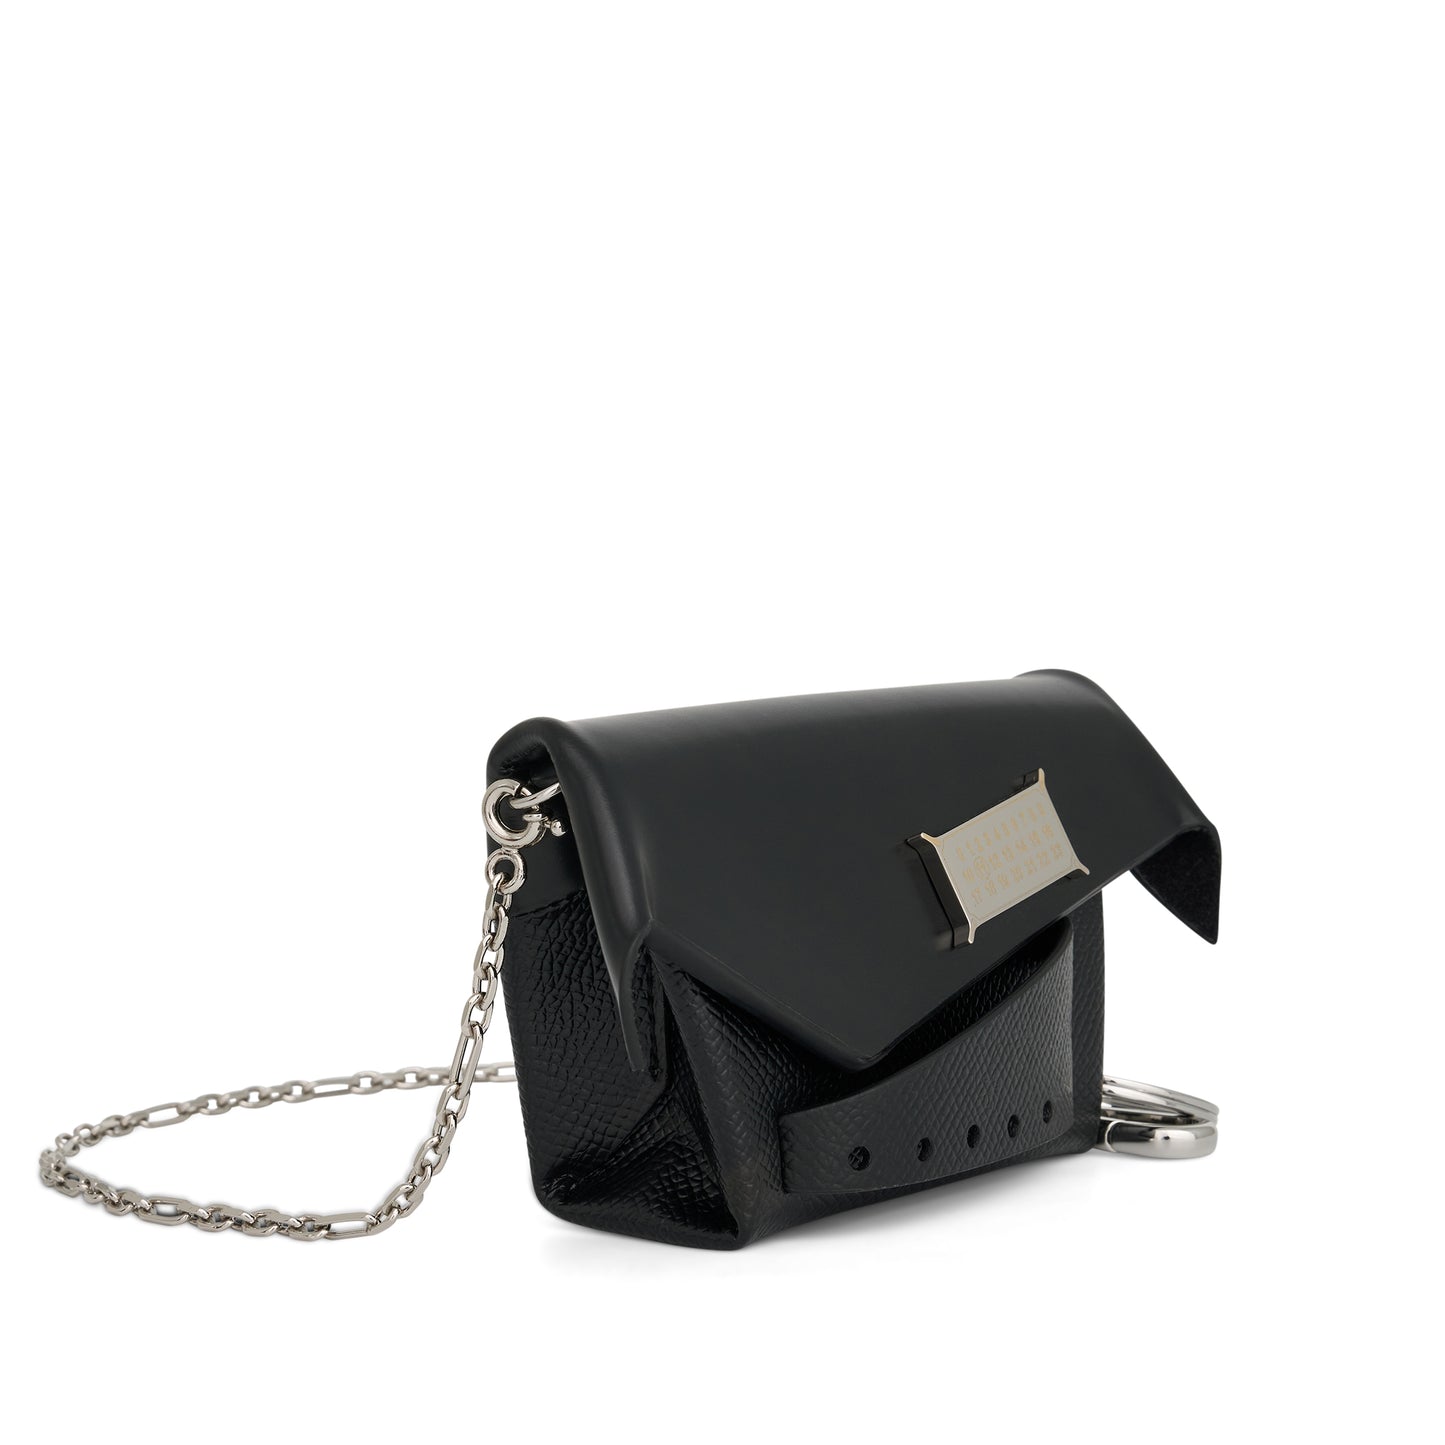 Maison Margiela Small Snatched Bag in Black